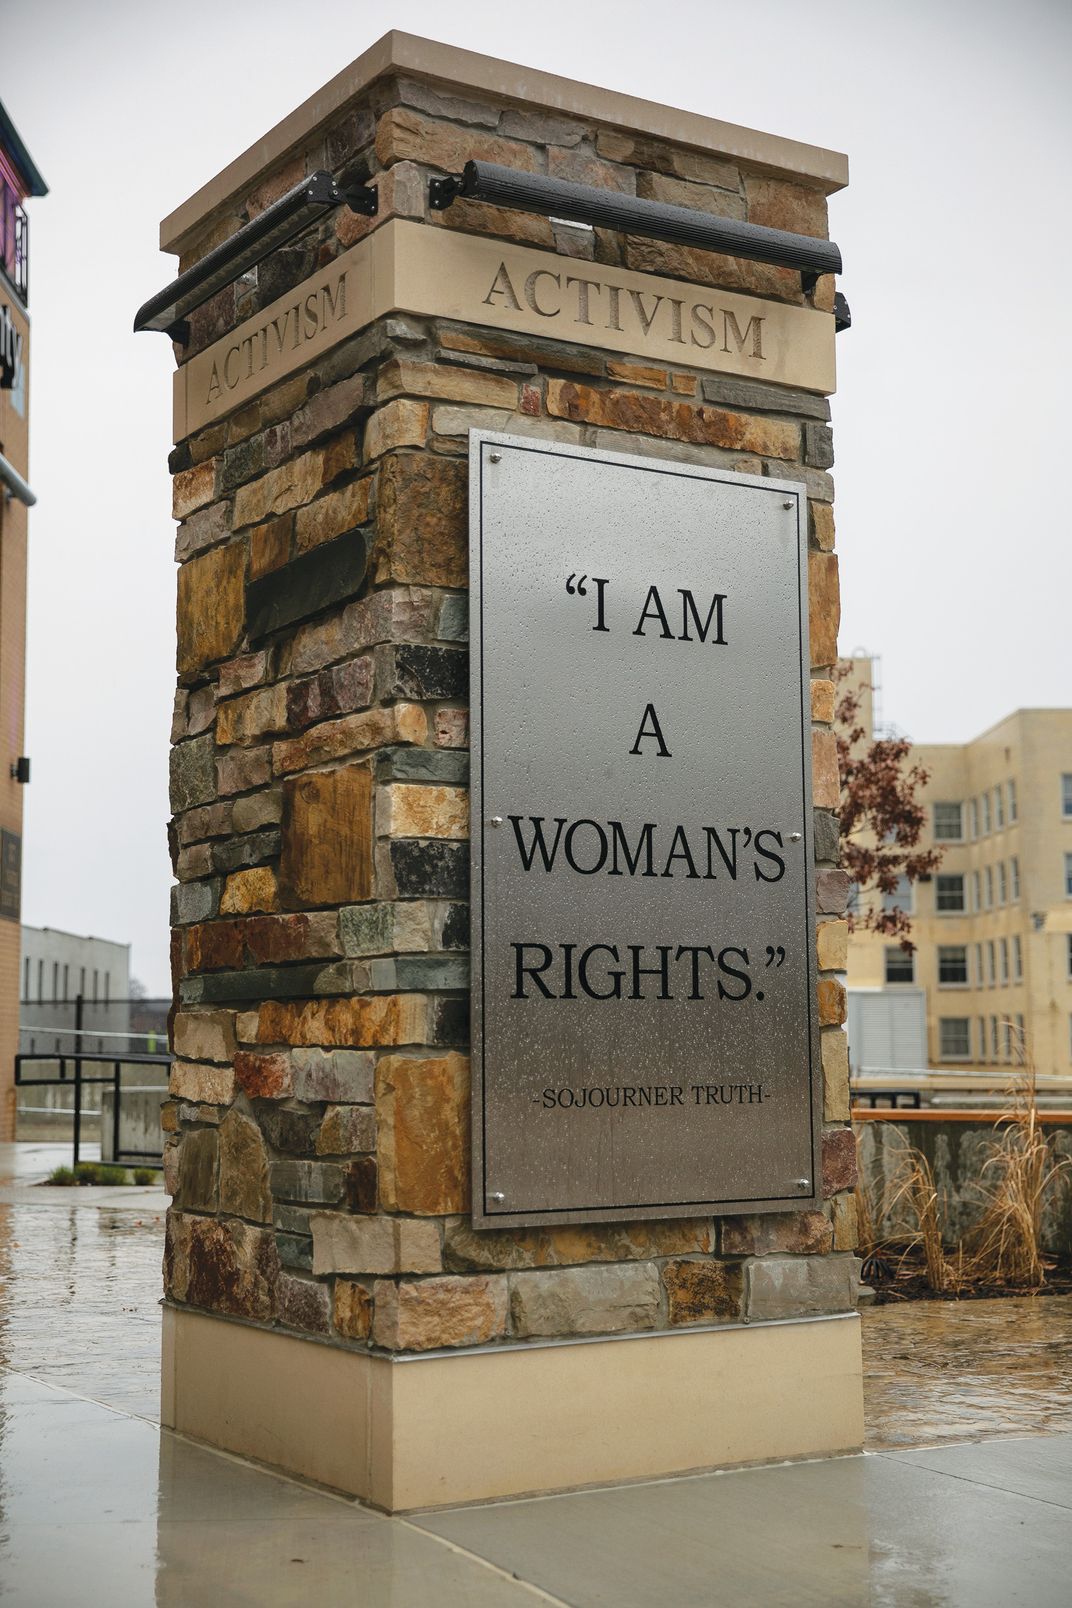 a column with the words "I am woman's rights" displayed on it.